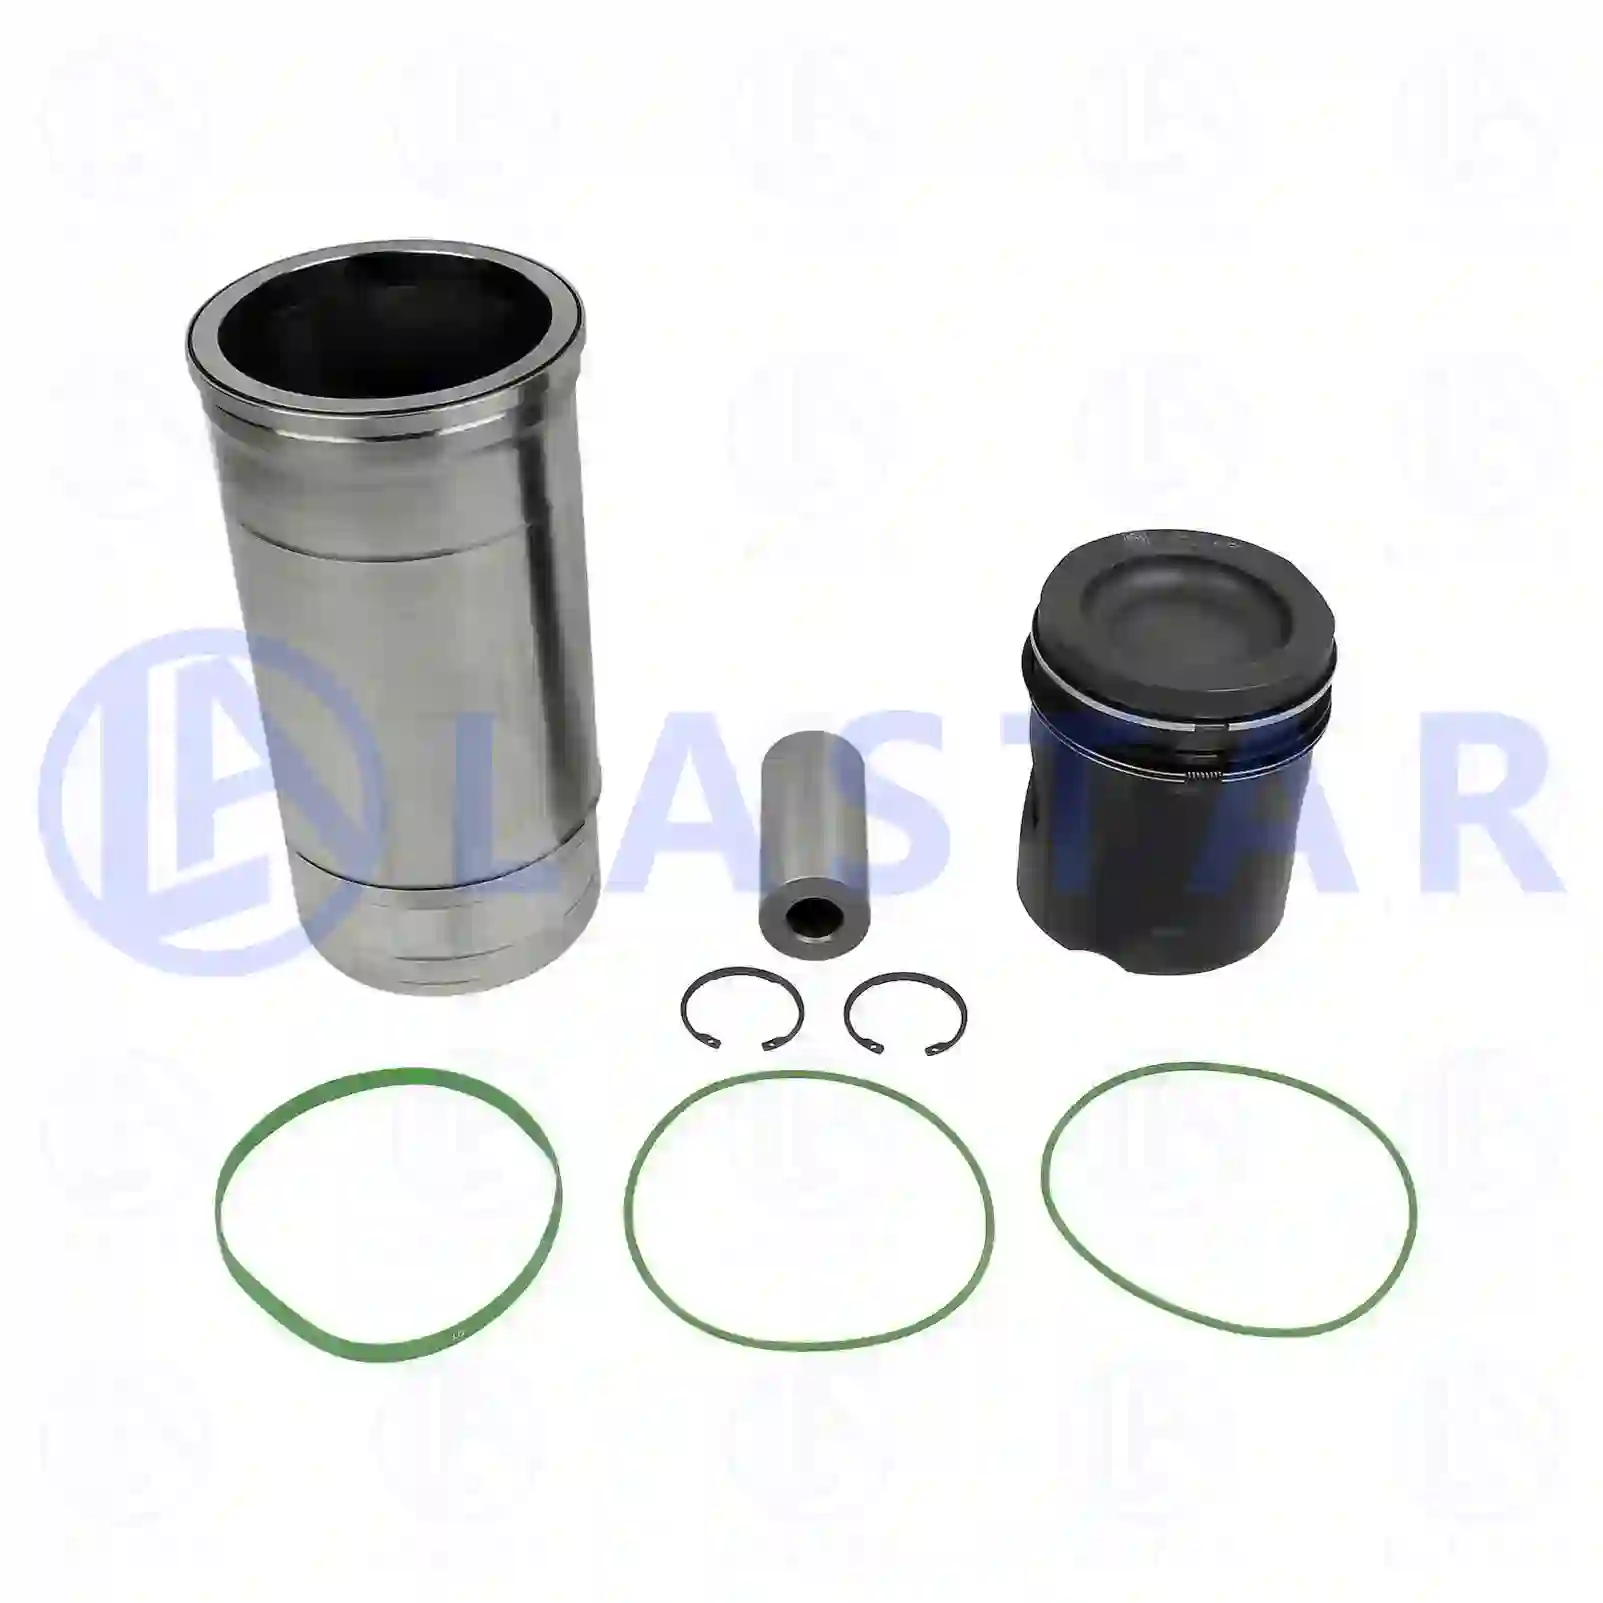 Piston with liner, 77703039, 551359, 551360, ZG01895-0008 ||  77703039 Lastar Spare Part | Truck Spare Parts, Auotomotive Spare Parts Piston with liner, 77703039, 551359, 551360, ZG01895-0008 ||  77703039 Lastar Spare Part | Truck Spare Parts, Auotomotive Spare Parts